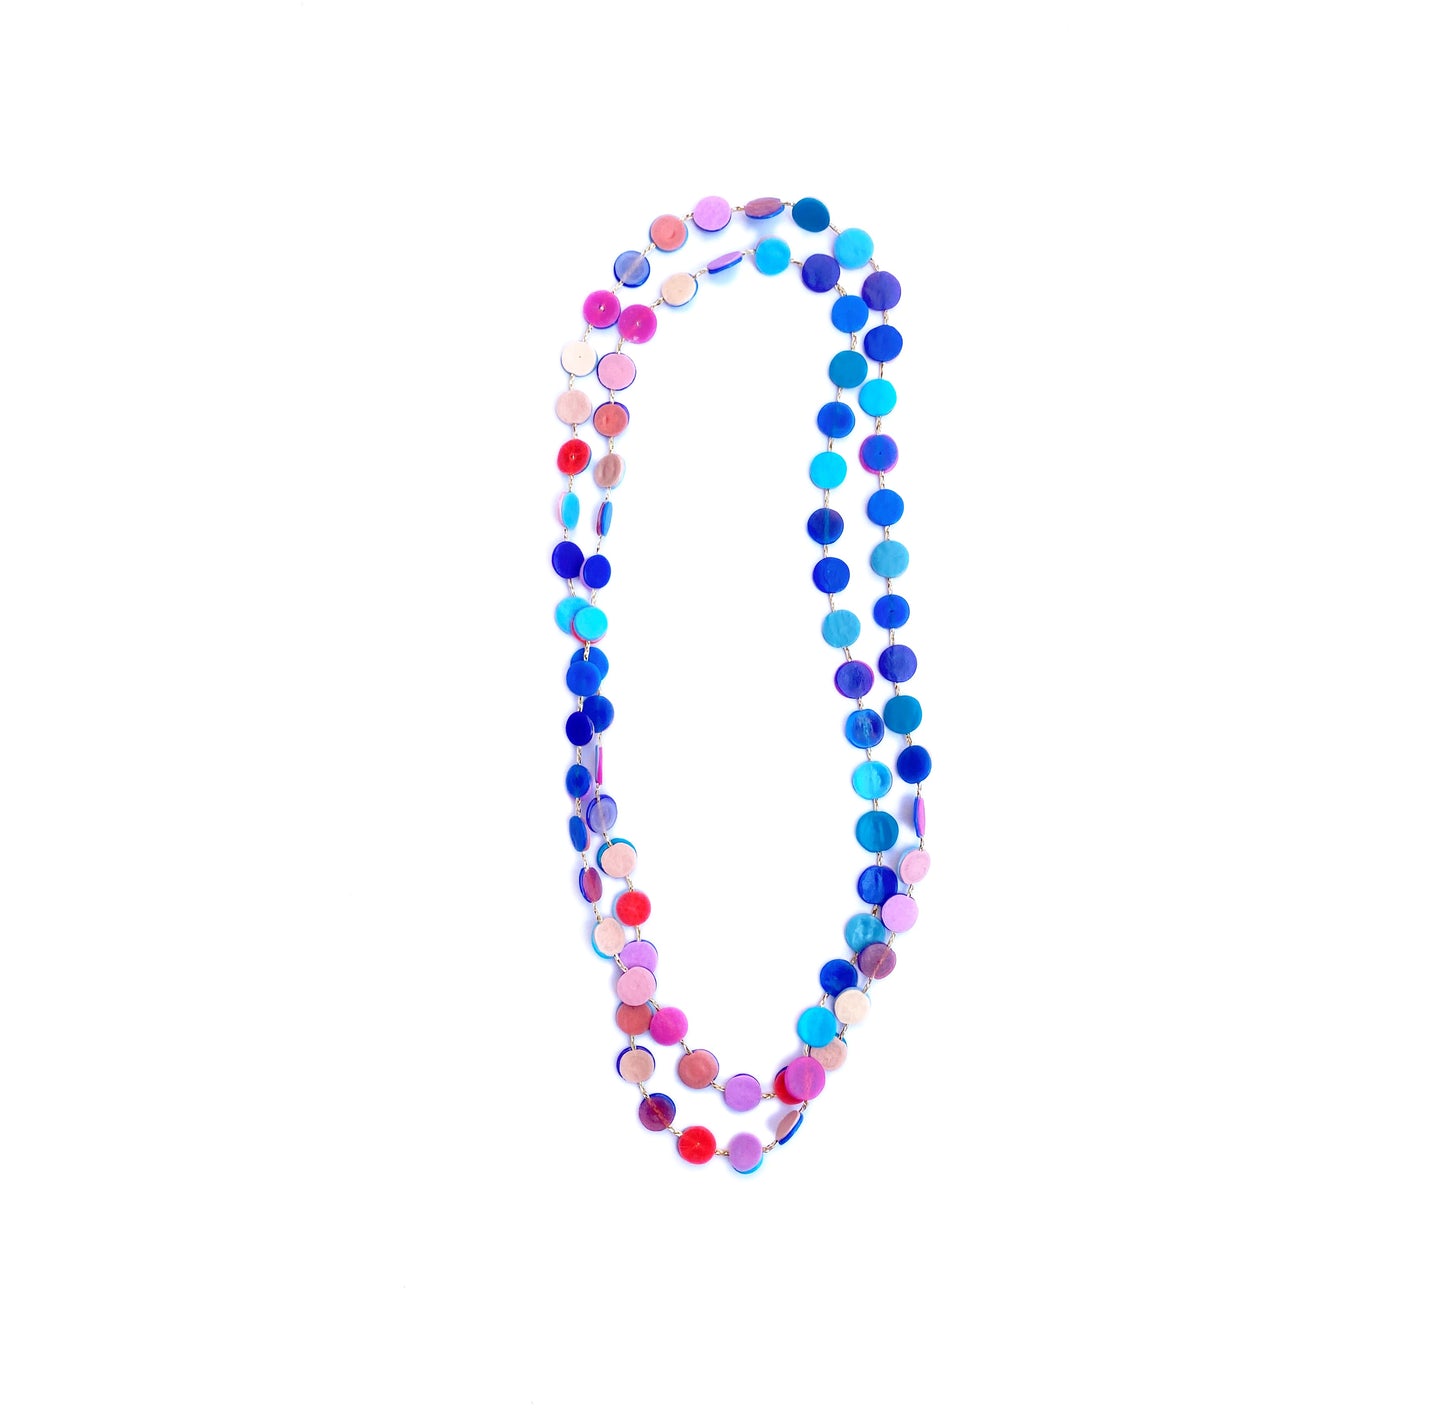 Complementary Necklace (blue/pink)